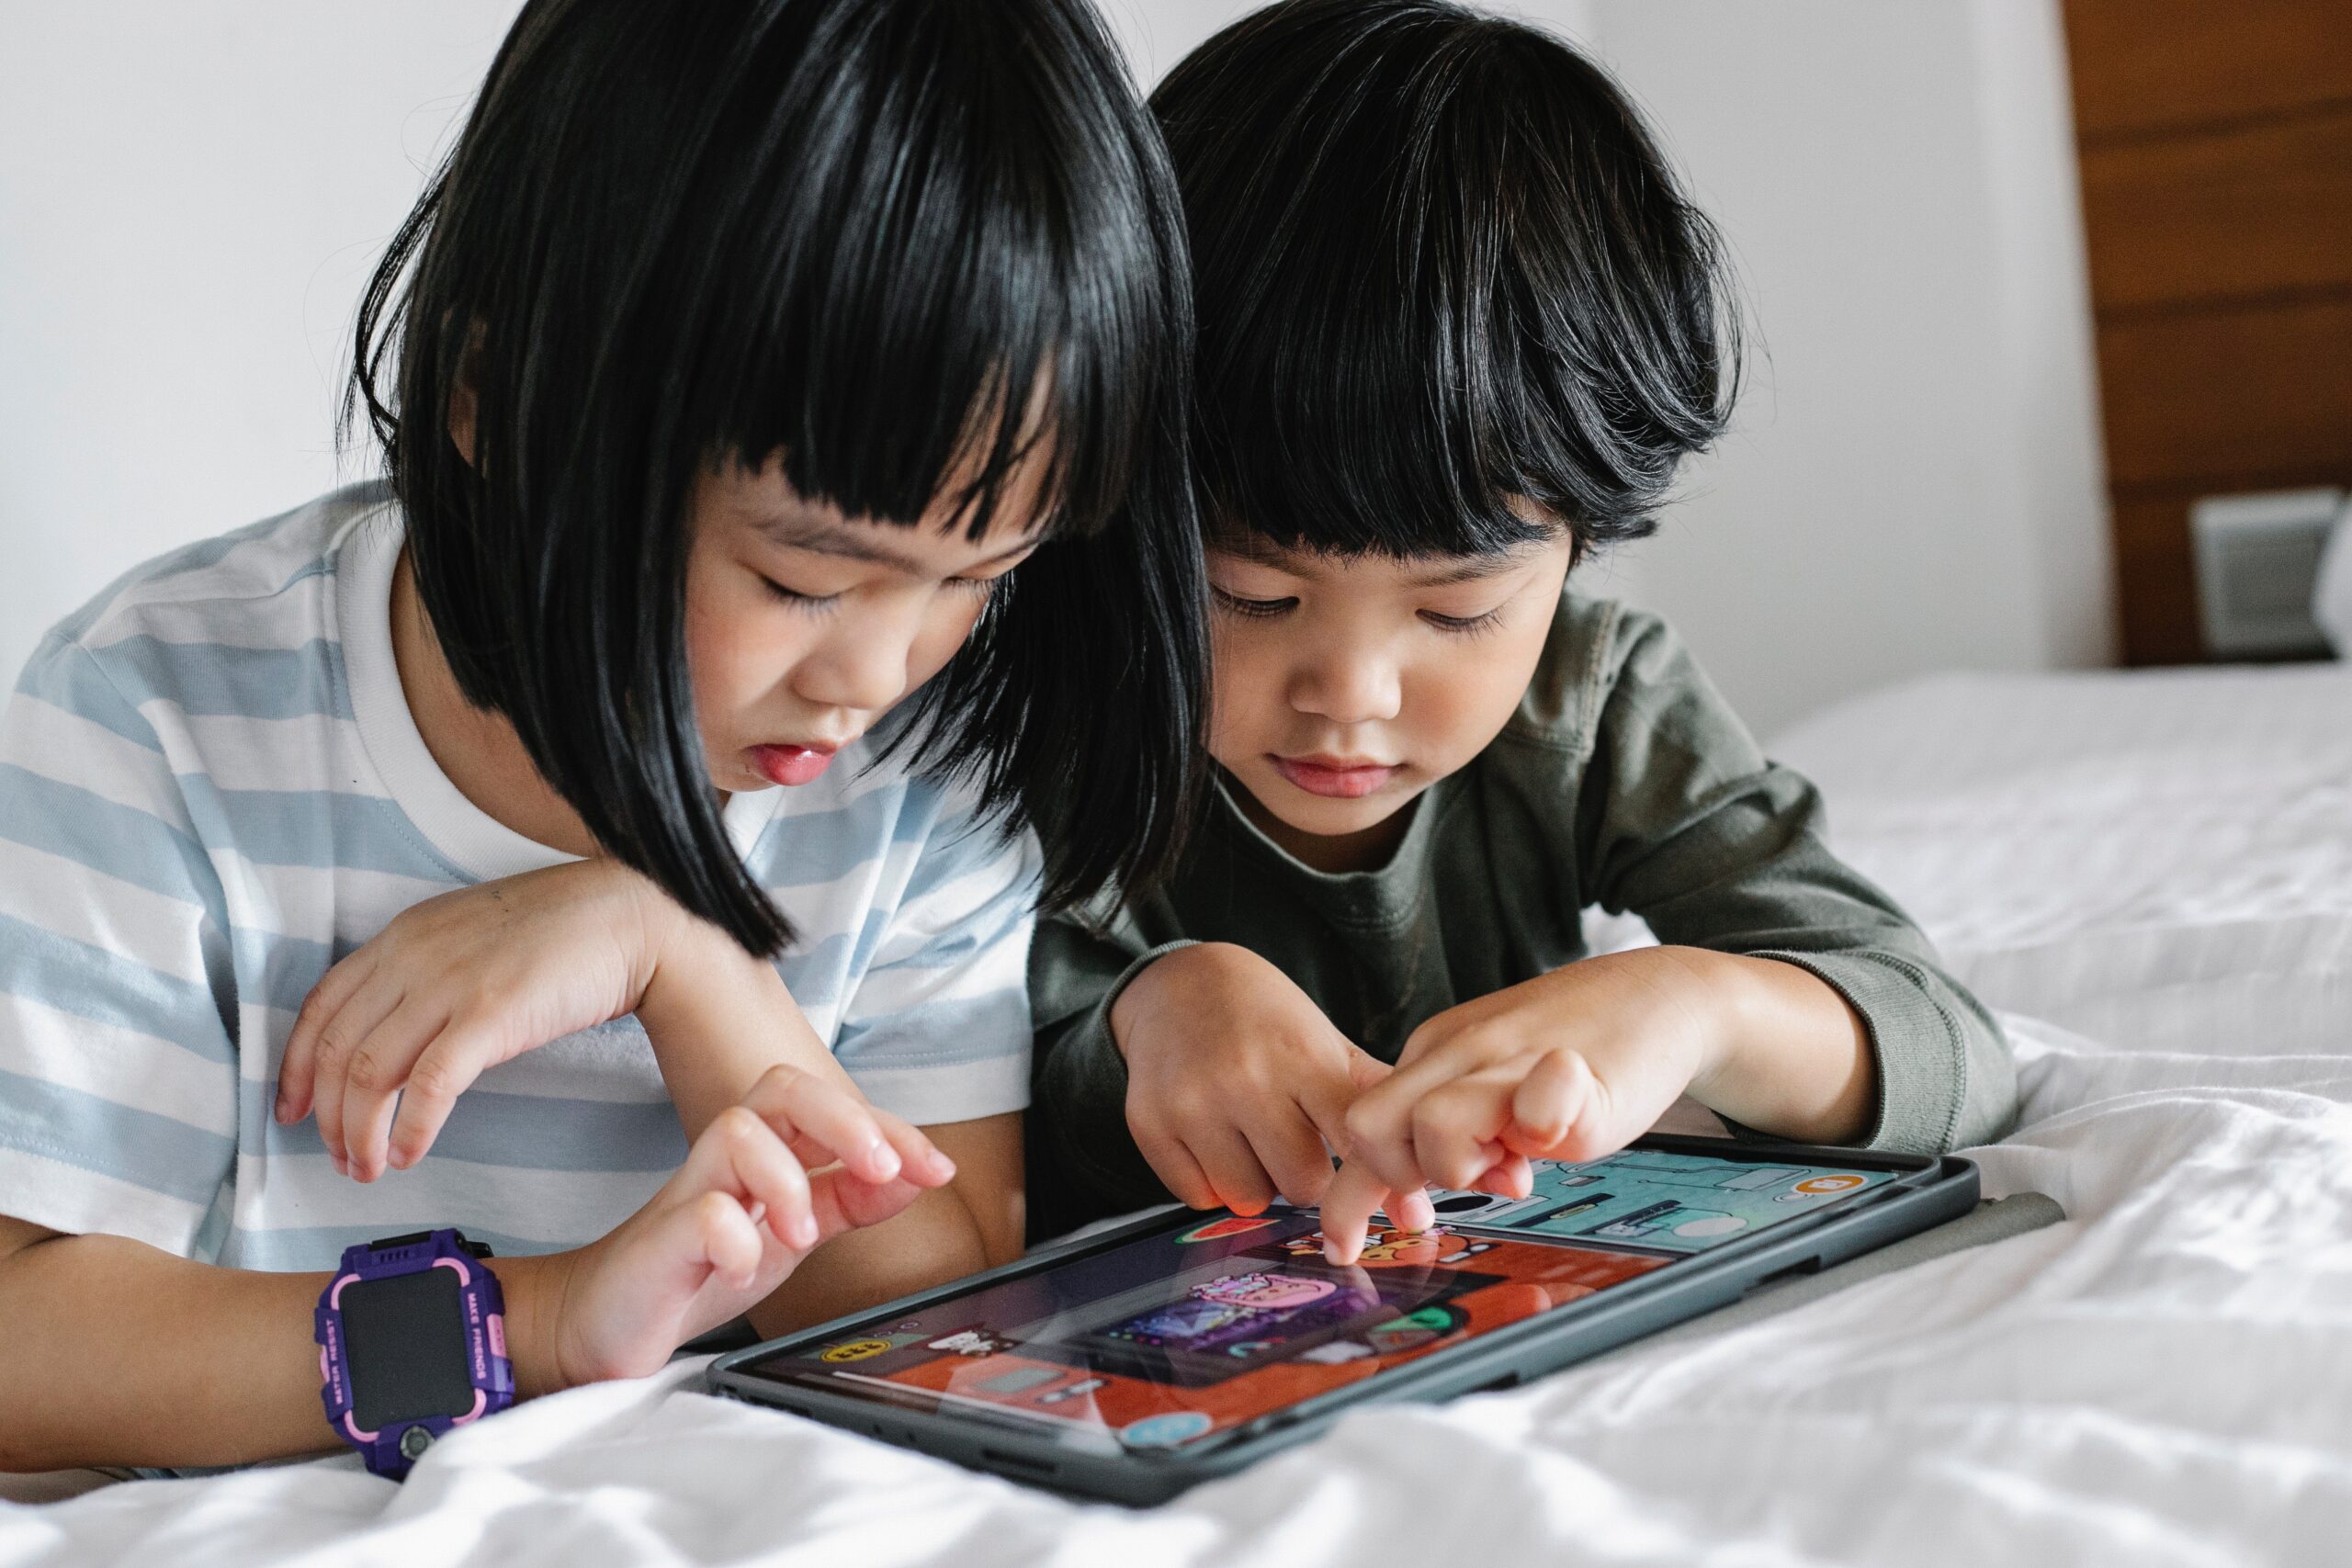 How soon can you give your kid tablet or phone?